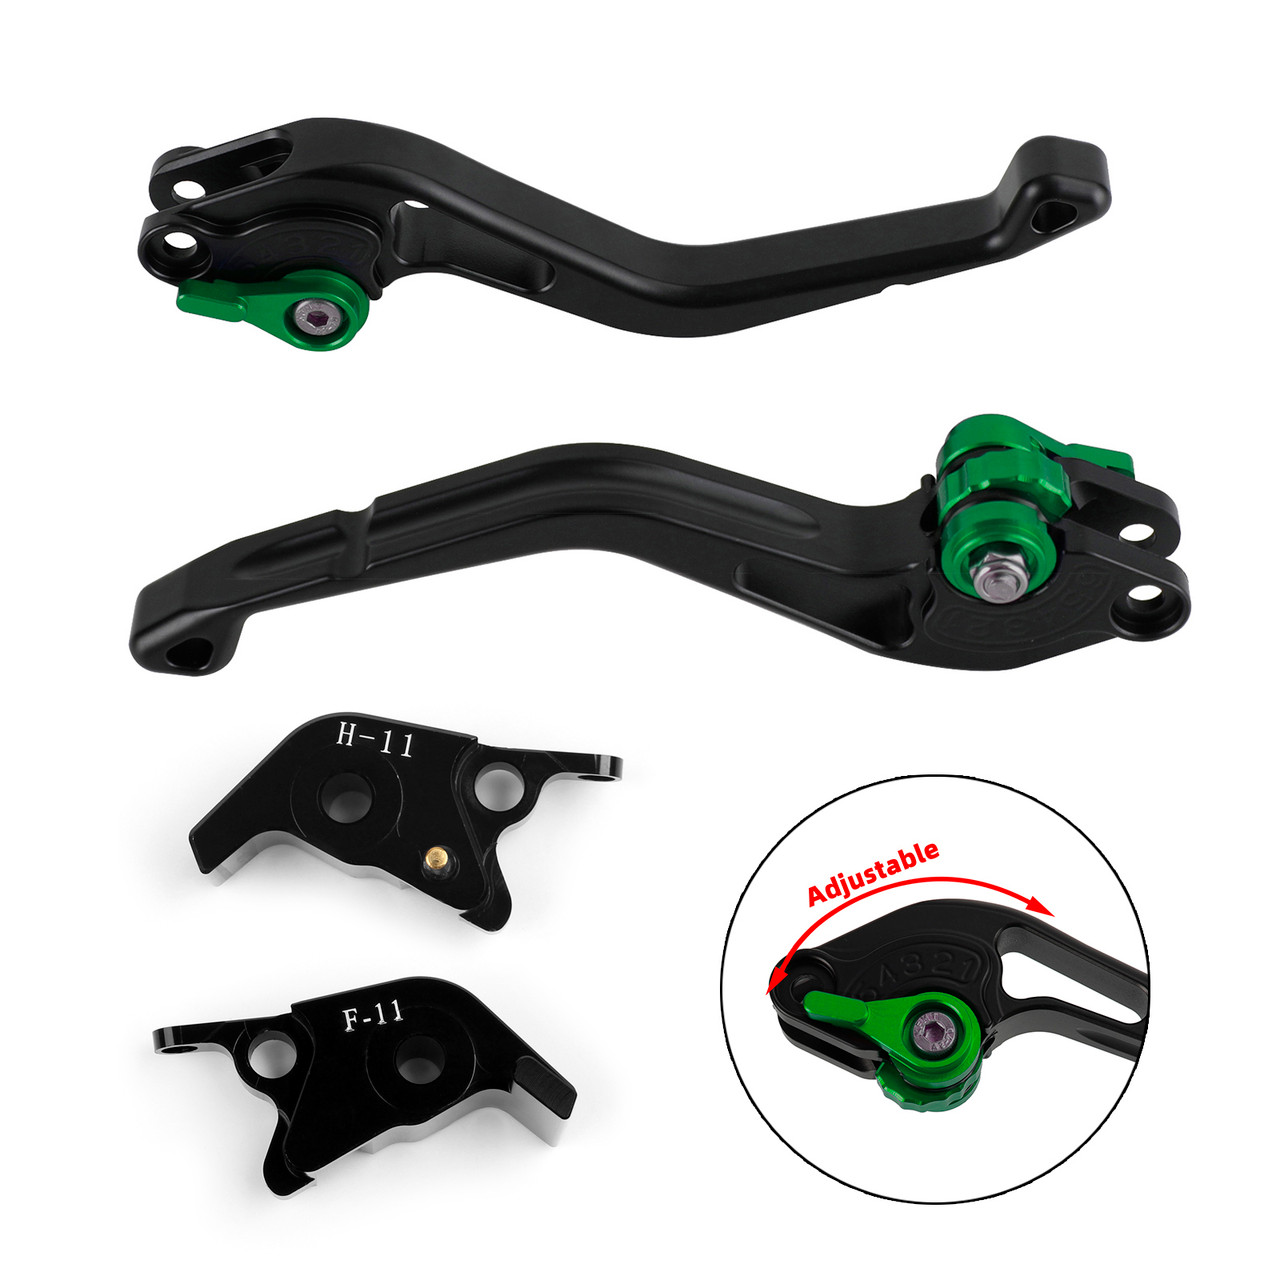 Short Clutch Brake Lever fit for Ducati 749 999/S/R 848 1098 1198 S4RS